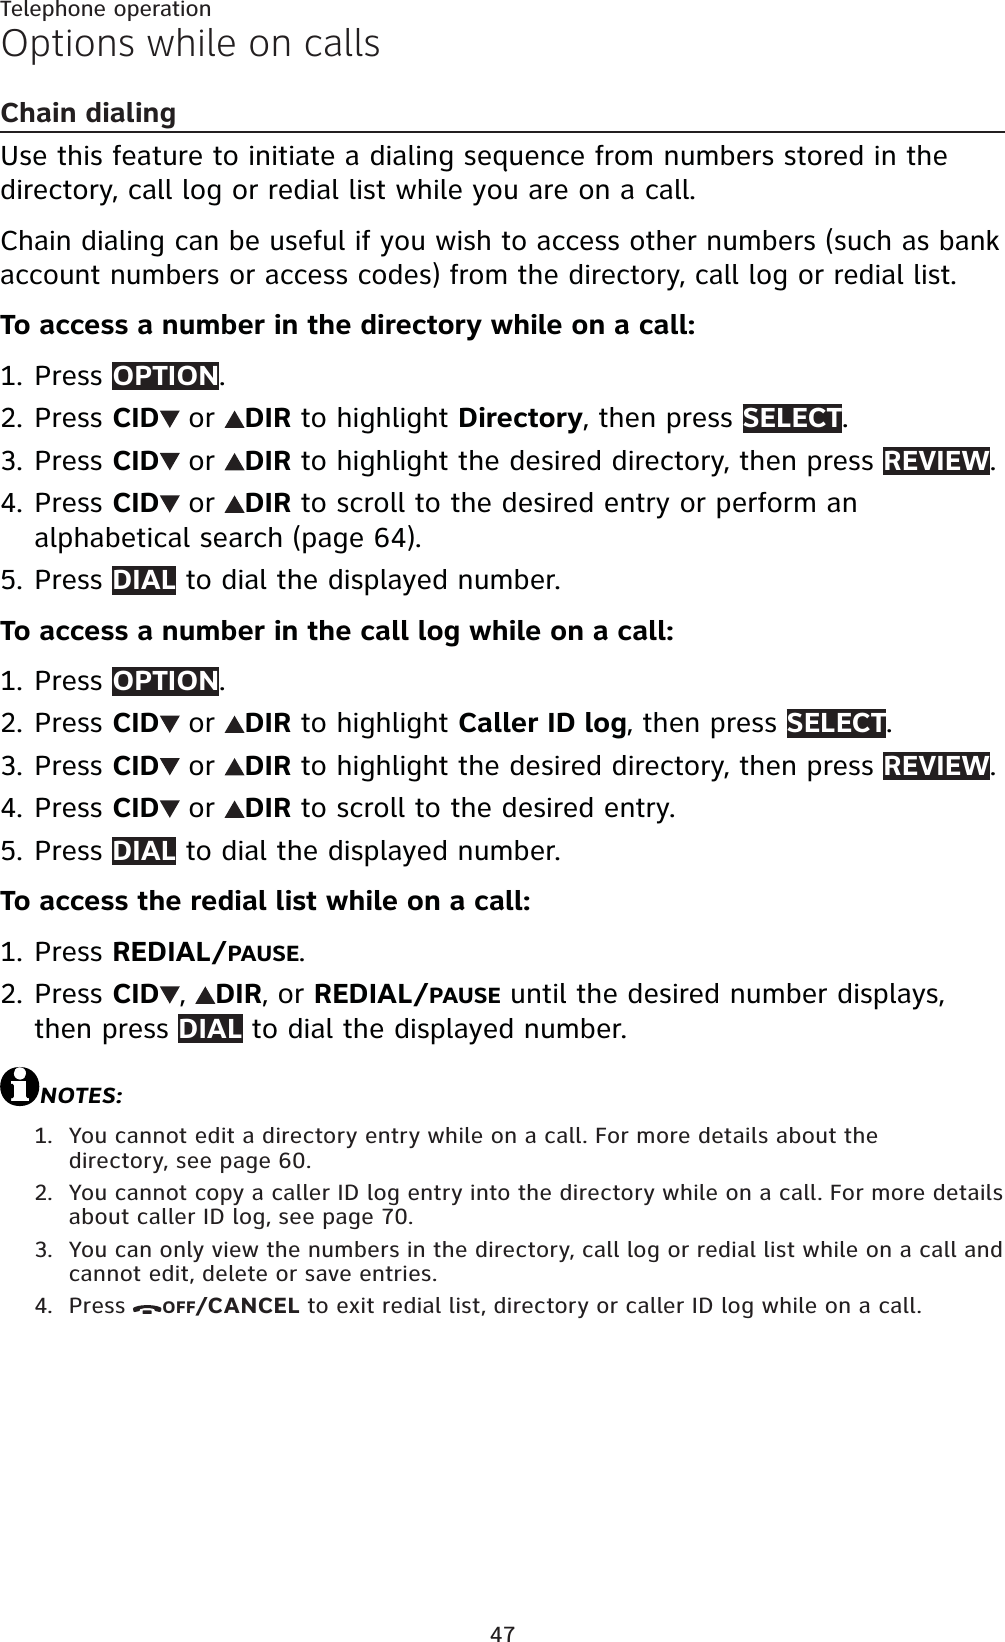 47Telephone operationOptions while on callsChain dialingUse this feature to initiate a dialing sequence from numbers stored in the directory, call log or redial list while you are on a call. Chain dialing can be useful if you wish to access other numbers (such as bank account numbers or access codes) from the directory, call log or redial list.To access a number in the directory while on a call:Press OPTION.Press CID or DIR to highlight Directory, then press SELECT.Press CID or DIR to highlight the desired directory, then press REVIEW.Press CID or DIR to scroll to the desired entry or perform an alphabetical search (page 64).Press DIAL to dial the displayed number.To access a number in the call log while on a call:Press OPTION.Press CID or DIR to highlight Caller ID log, then press SELECT.Press CID or DIR to highlight the desired directory, then press REVIEW.Press CID or DIR to scroll to the desired entry.Press DIAL to dial the displayed number.To access the redial list while on a call:Press REDIAL/PAUSE.Press CID ,DIR,orREDIAL/PAUSE until the desired number displays, then press DIAL to dial the displayed number.NOTES:You cannot edit a directory entry while on a call. For more details about the directory, see page 60.You cannot copy a caller ID log entry into the directory while on a call. For more details about caller ID log, see page 70.You can only view the numbers in the directory, call log or redial list while on a call and cannot edit, delete or save entries.Press OFF/CANCEL to exit redial list, directory or caller ID log while on a call.1.2.3.4.5.1.2.3.4.5.1.2.1.2.3.4.